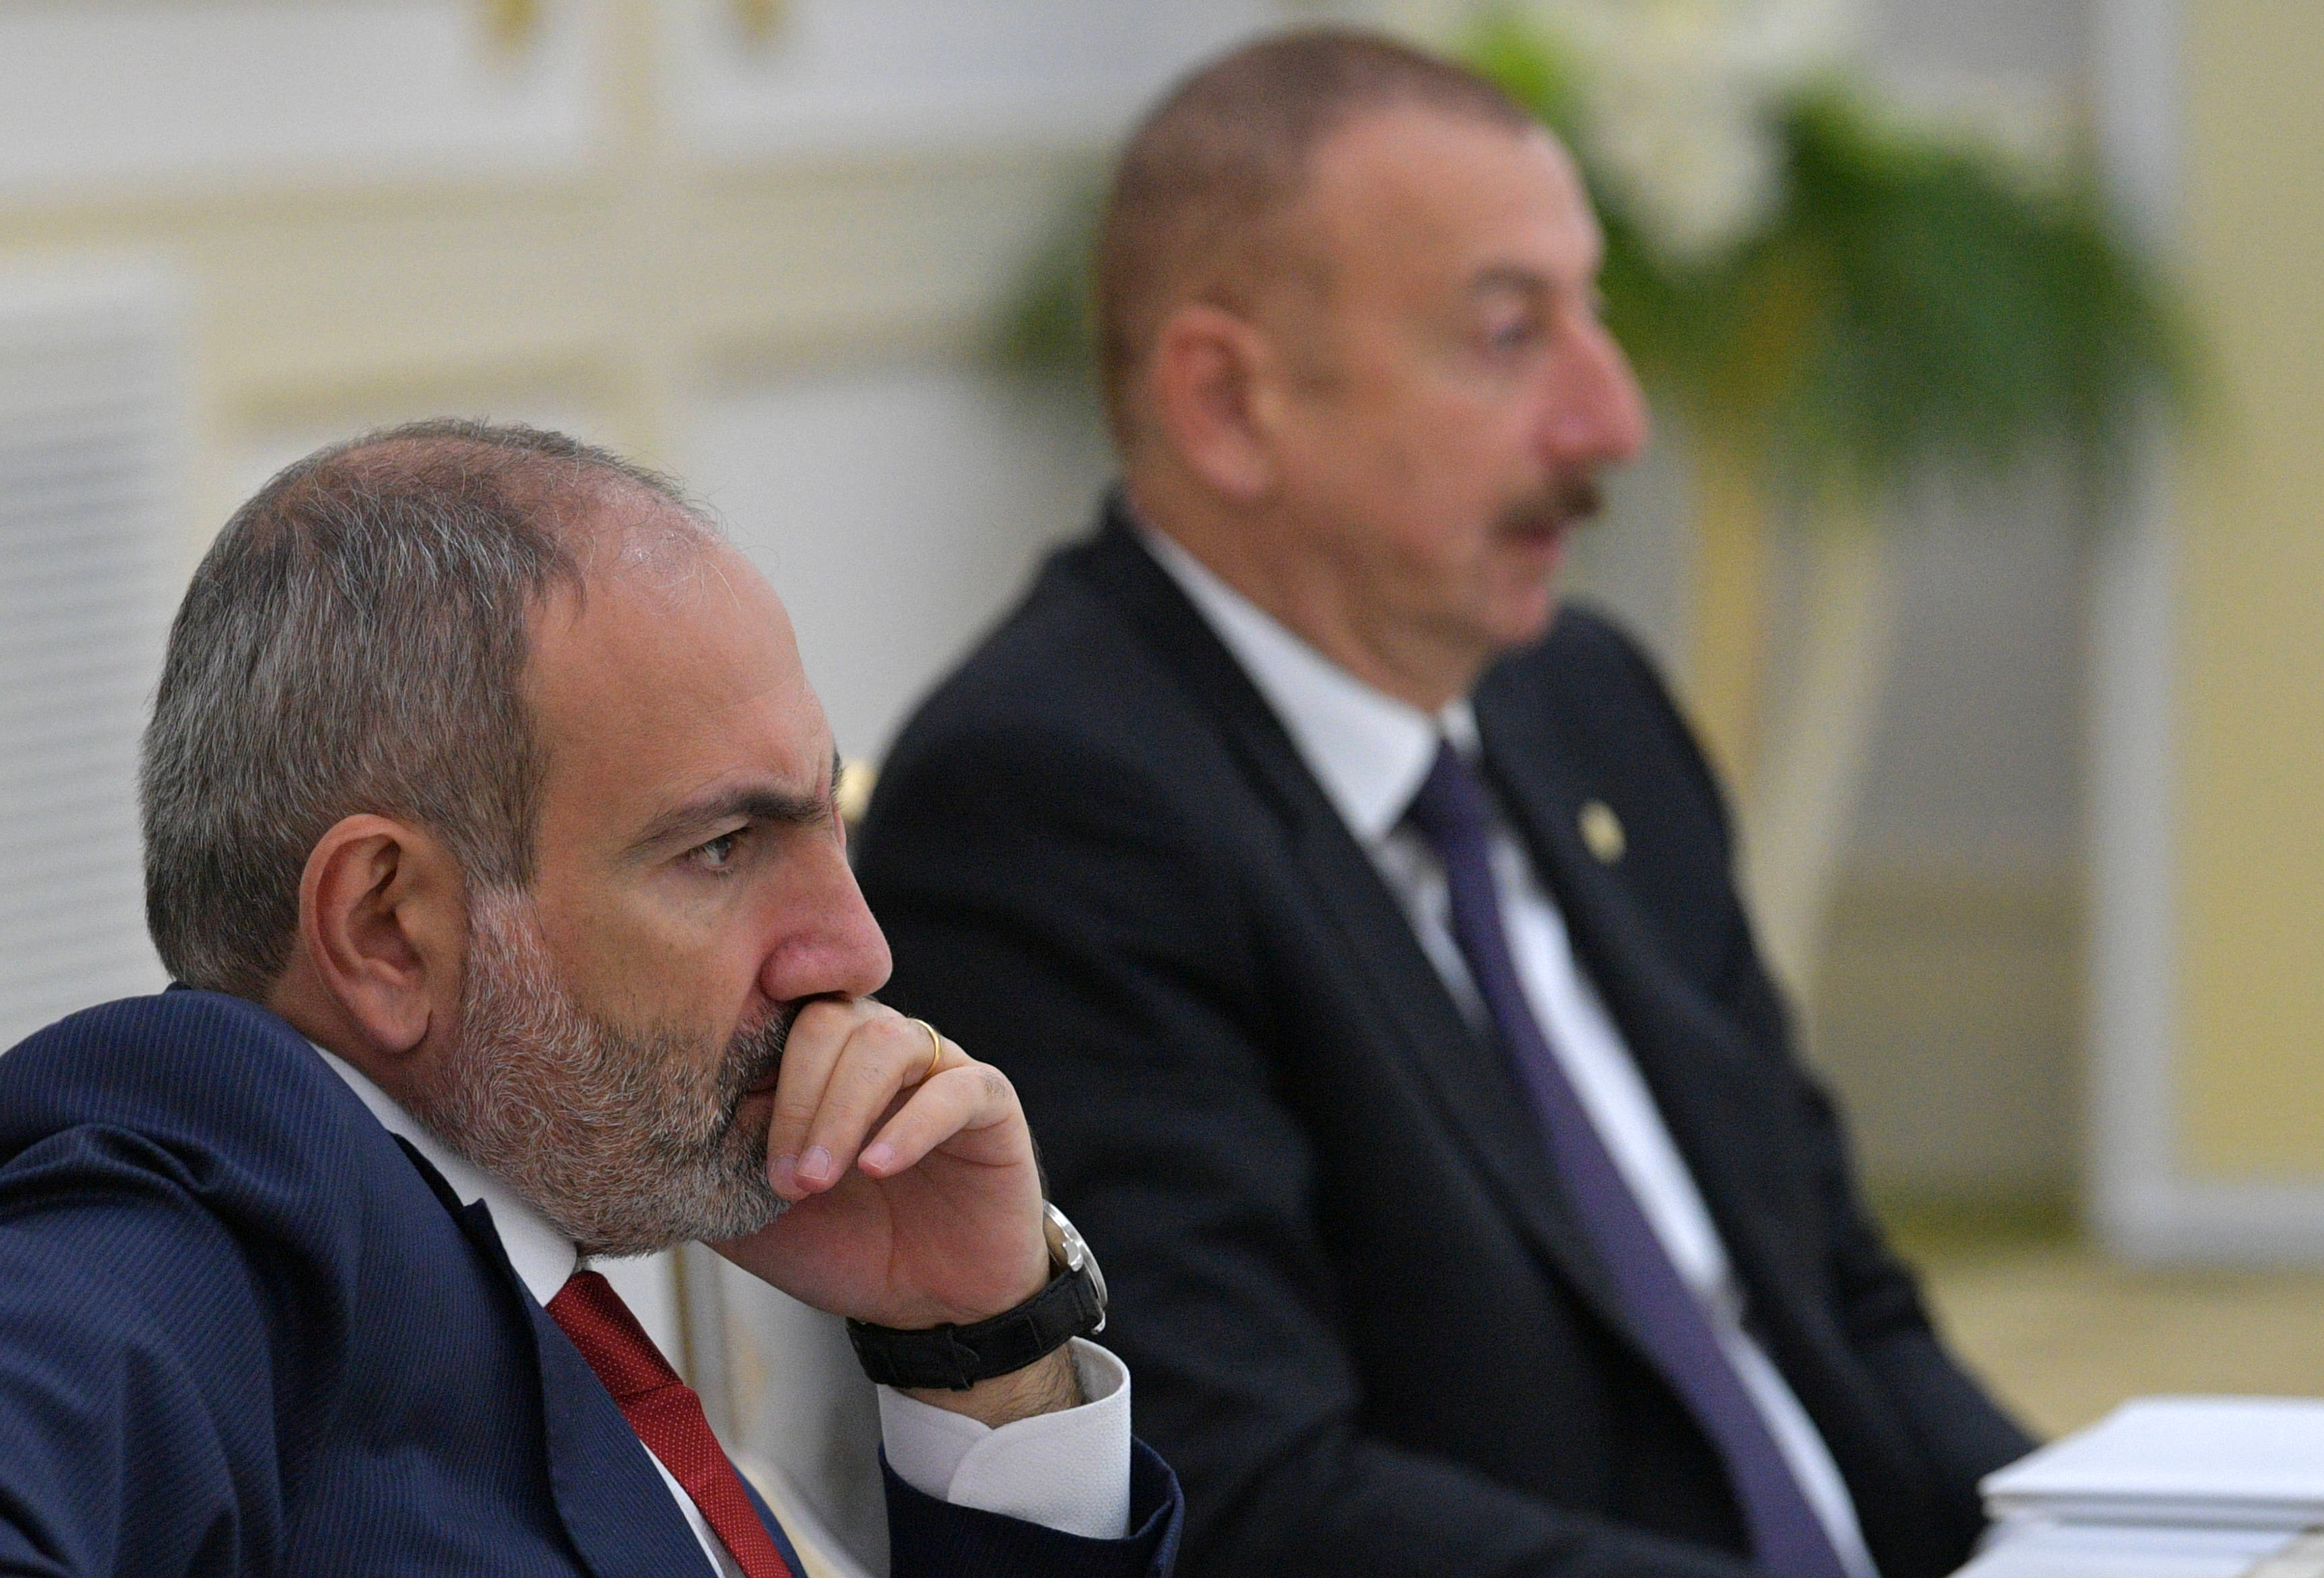 Armenia's Prime Minister Pashinyan and Azerbaijan's President Aliyev attend a meeting of heads of the Commonwealth of Independent States (CIS) in Ashgabat